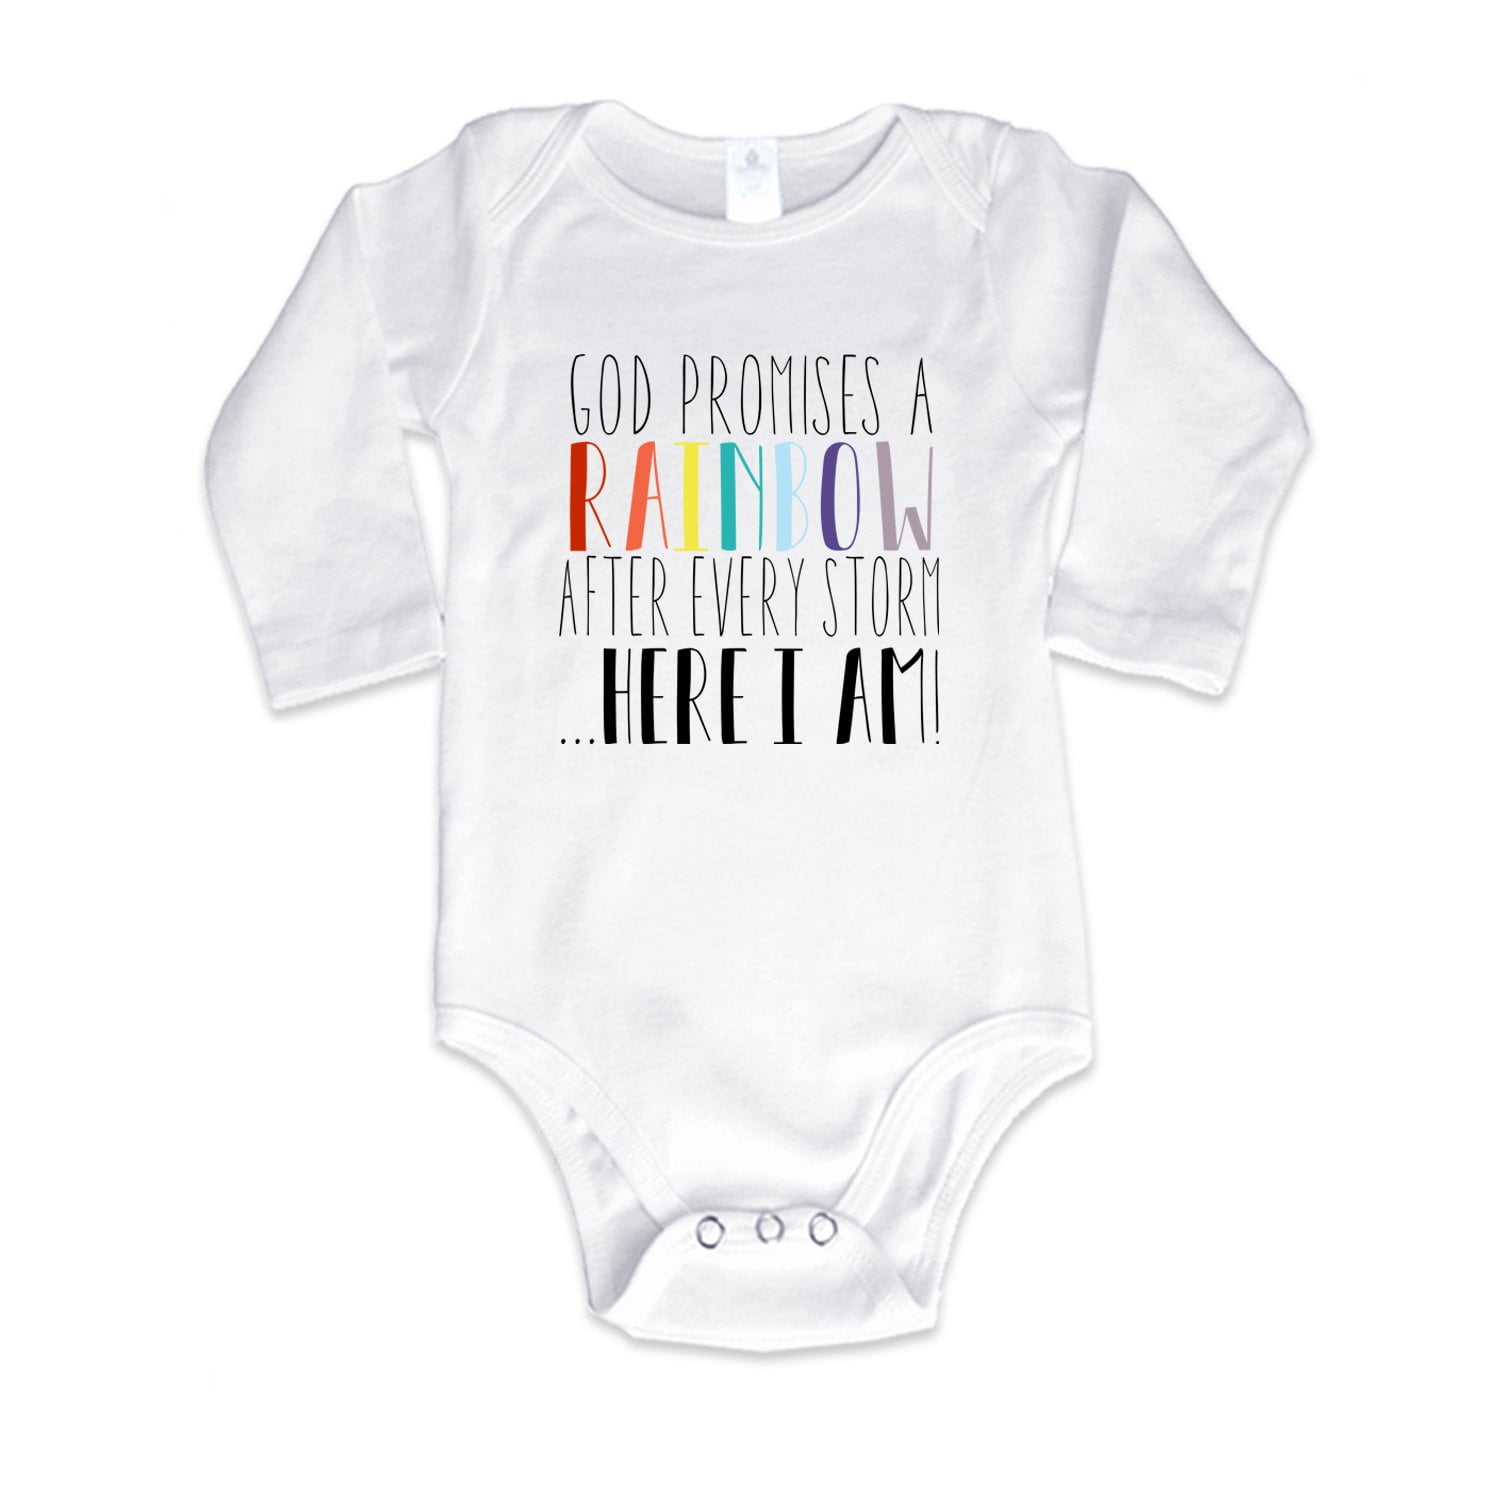 NanyCrafts Silly Rabbit Easter is for Jesus Bodysuit